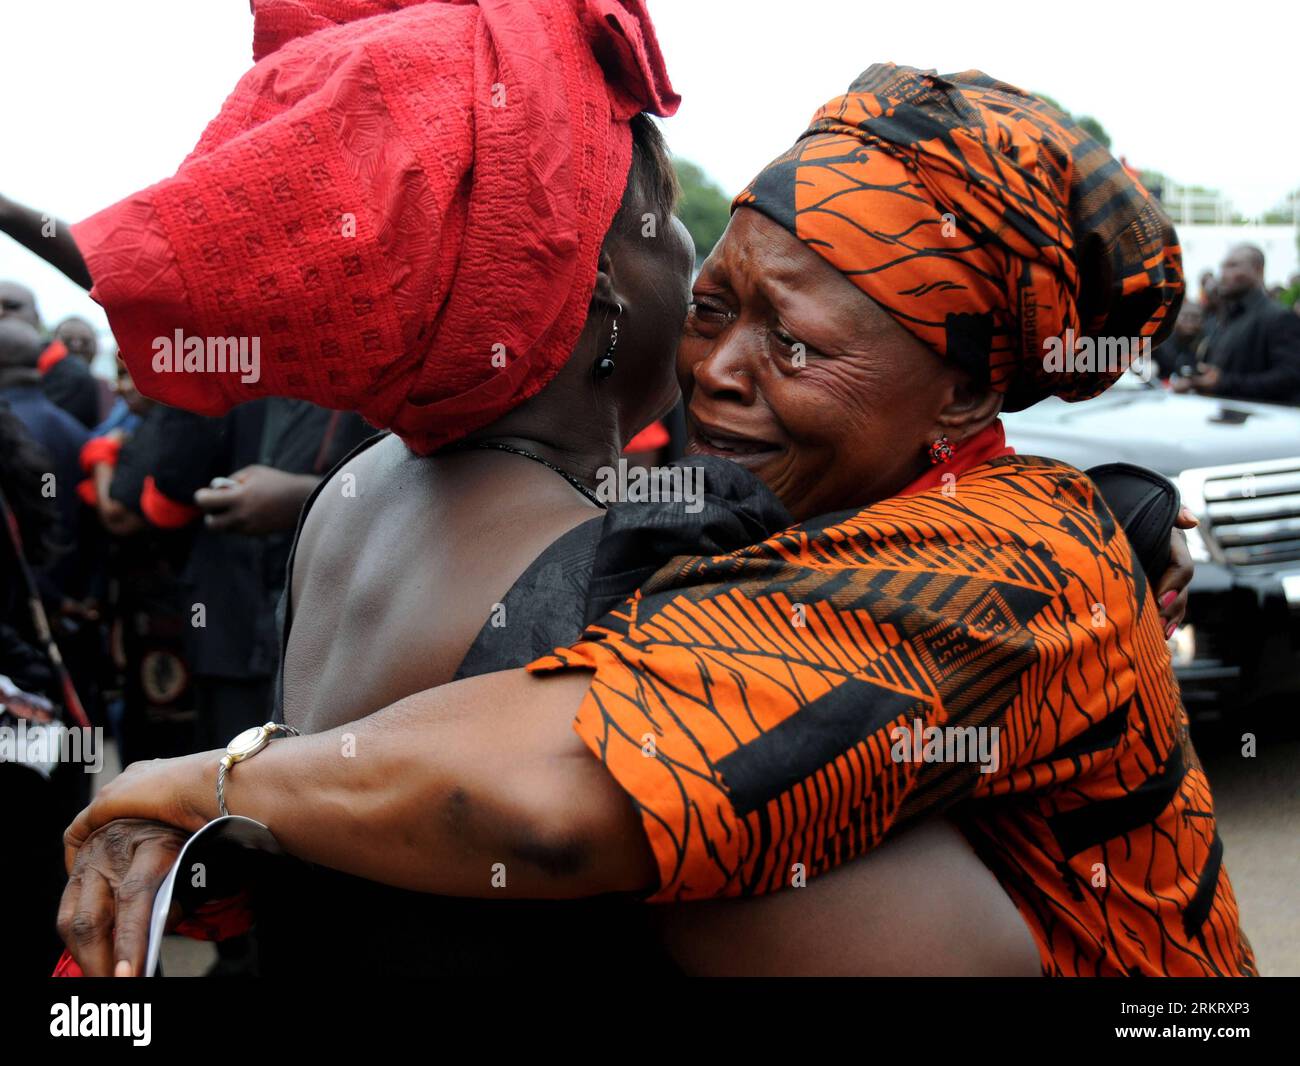 Bildnummer: 58325209  Datum: 08.08.2012  Copyright: imago/Xinhua (120808) -- ACCRA, Aug. 8, 2012 (Xinhua) -- Two Ghanaian women weep outside the State Banquet Hall after they bid farewell to the remains of Ghana s late president John Evans Atta Mills in Accra, capital of Ghana, on Aug. 8, 2012. The late President Mills, 68, died suddenly on July 24, at the 37th Military Hospital after falling ill. (Xinhua/Shao Haijun) GHANA-ACCRA-LATE PRESIDENT-FUNERAL PUBLICATIONxNOTxINxCHN People Politik Gedenken Trauer xjh x0x premiumd 2012 quer     58325209 Date 08 08 2012 Copyright Imago XINHUA  Accra Aug Stock Photo